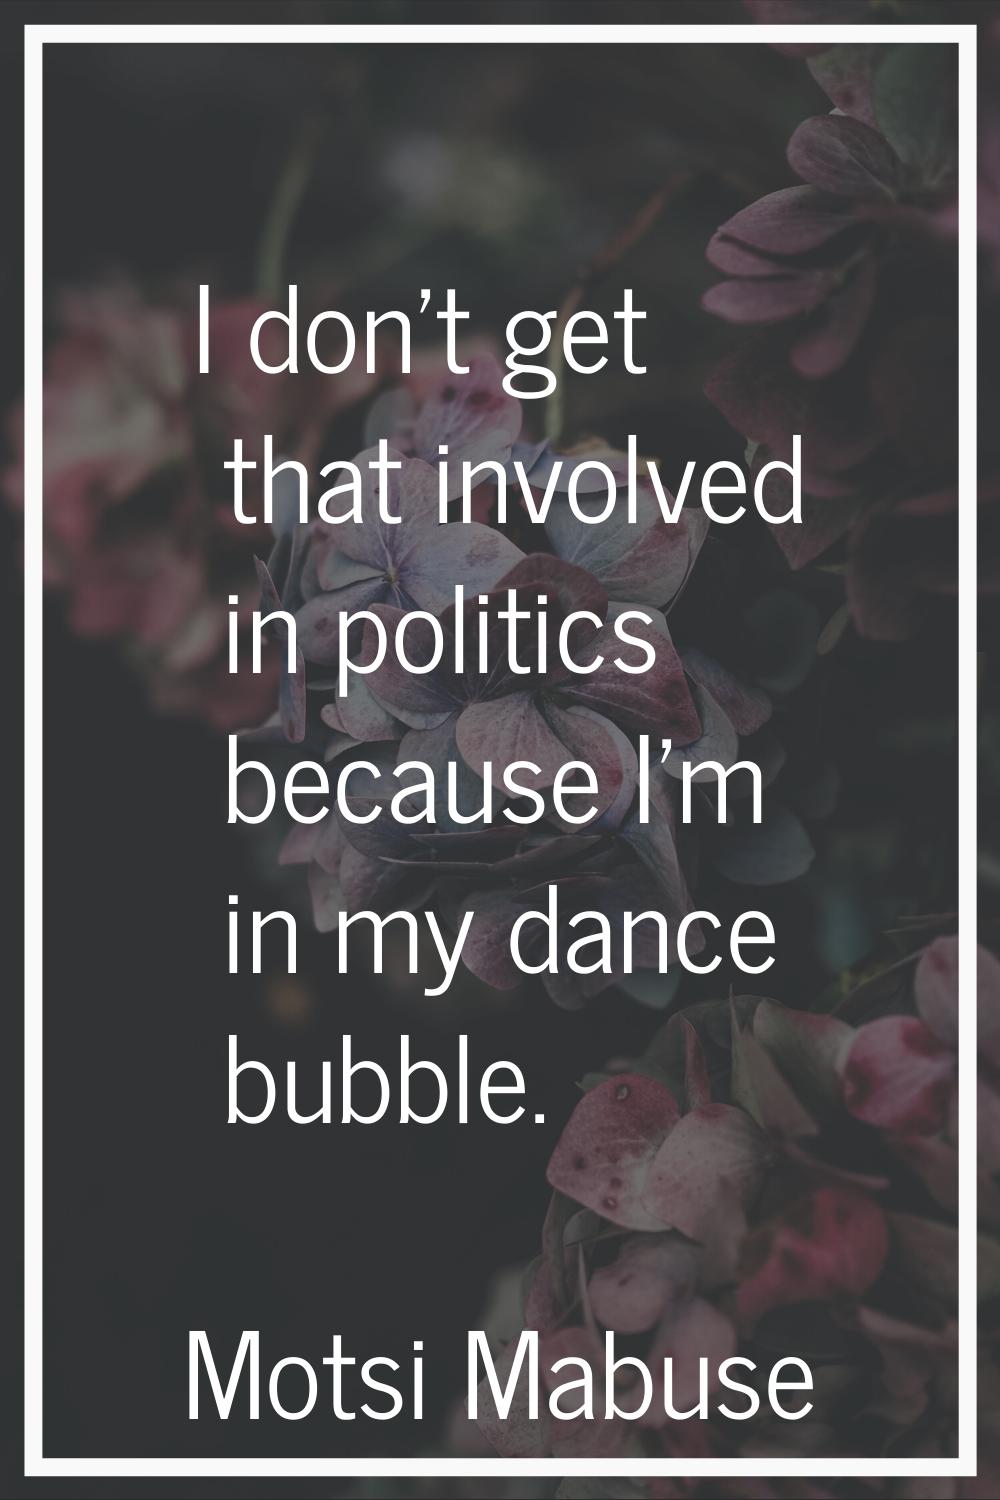 I don't get that involved in politics because I'm in my dance bubble.